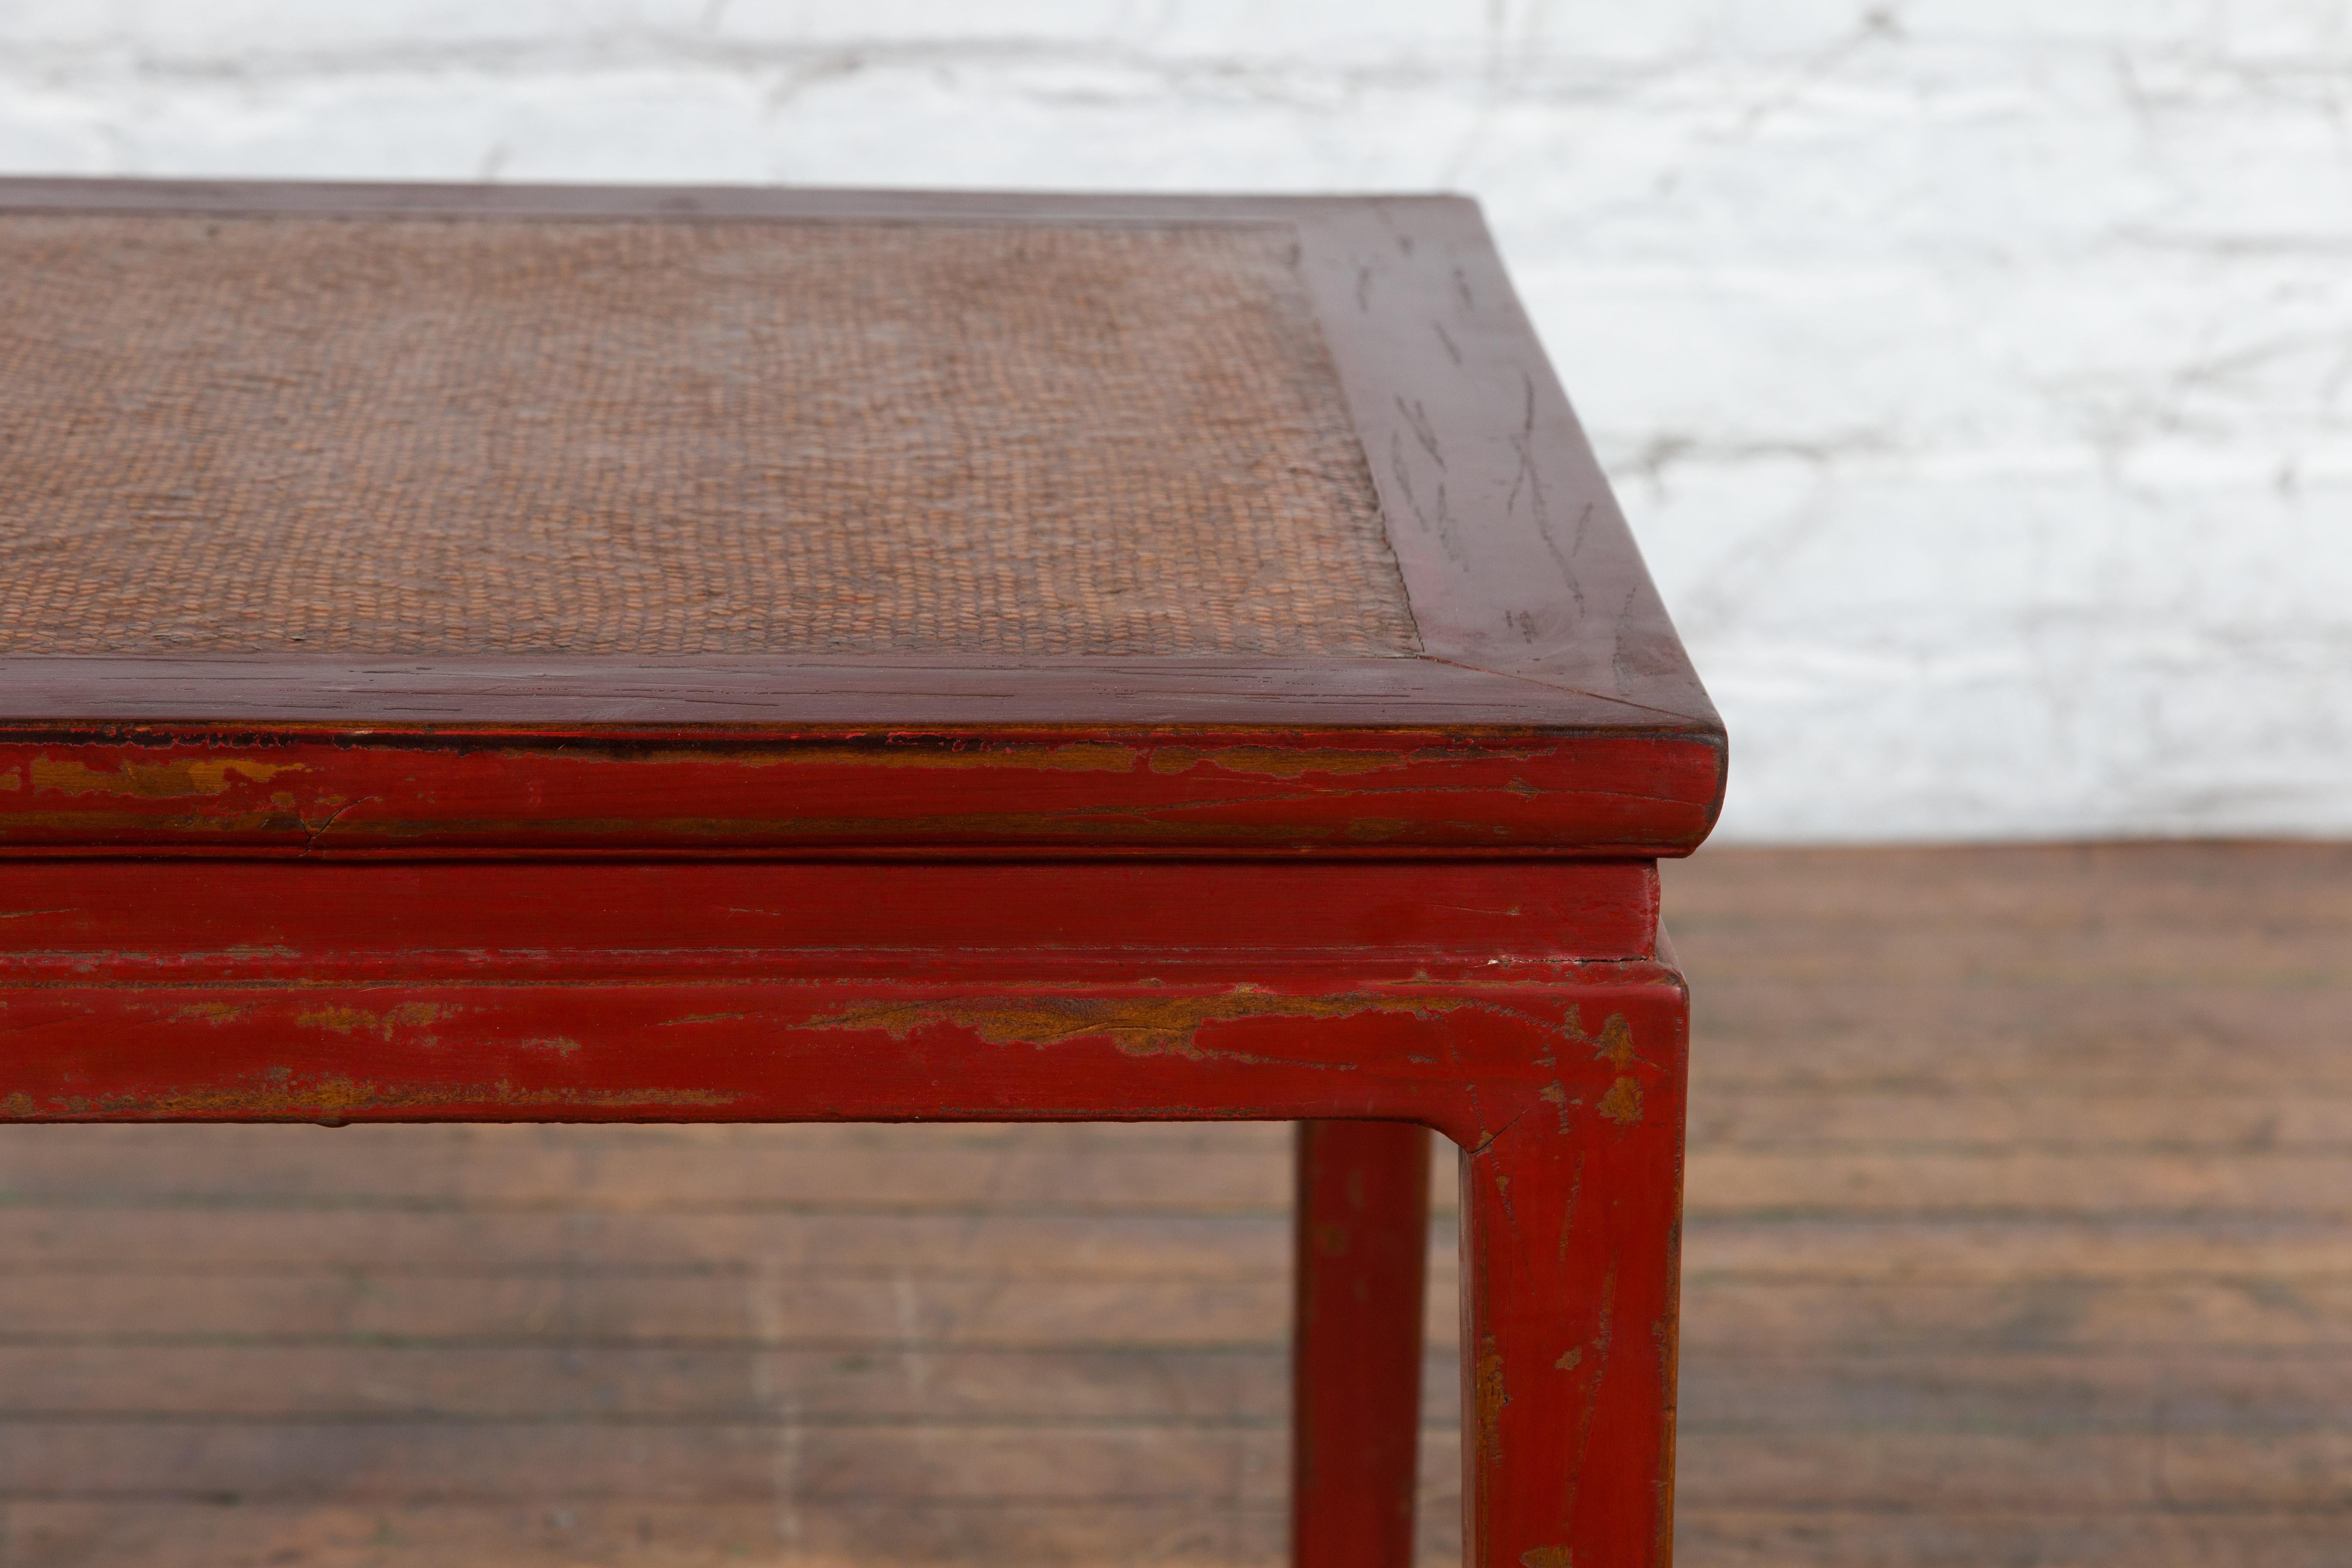 Chinese Qing Dynasty 19th Century Red Lacquer Side Table with Woven Rattan Top For Sale 3